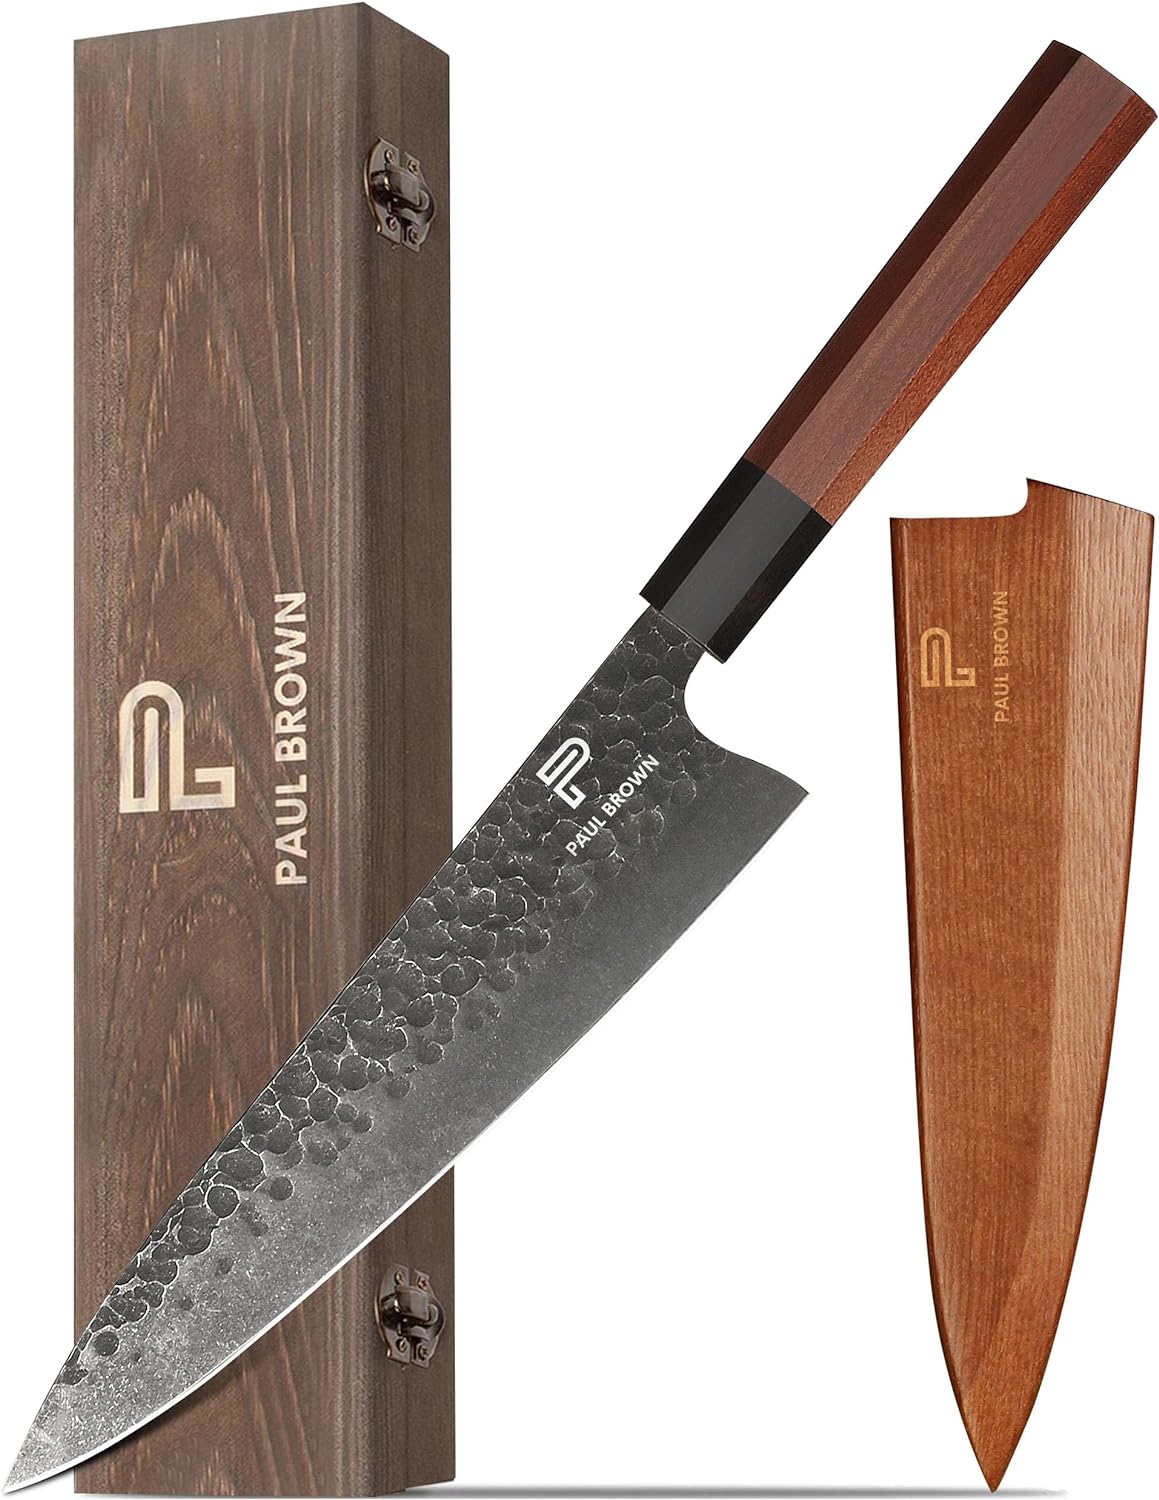 KD Hand Forged Chef Knife High Carbon Steel with Wooden Sheath & Box